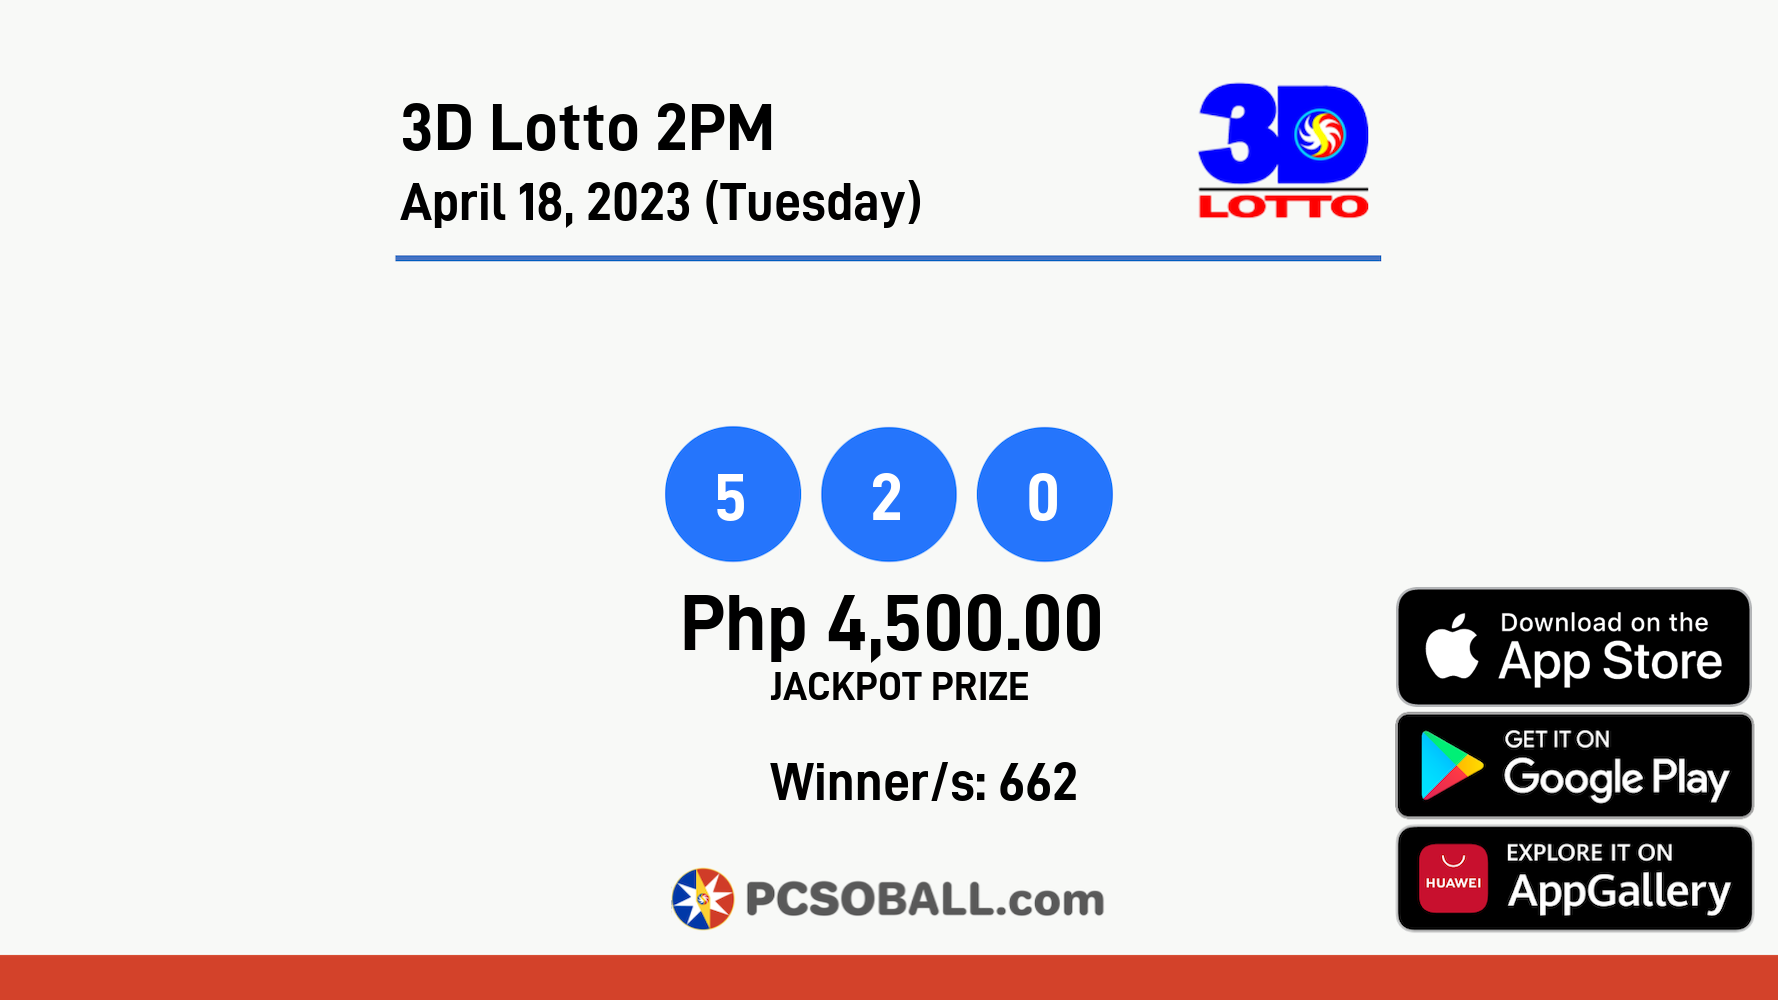 3D Lotto 2PM April 18, 2023 (Tuesday) Result